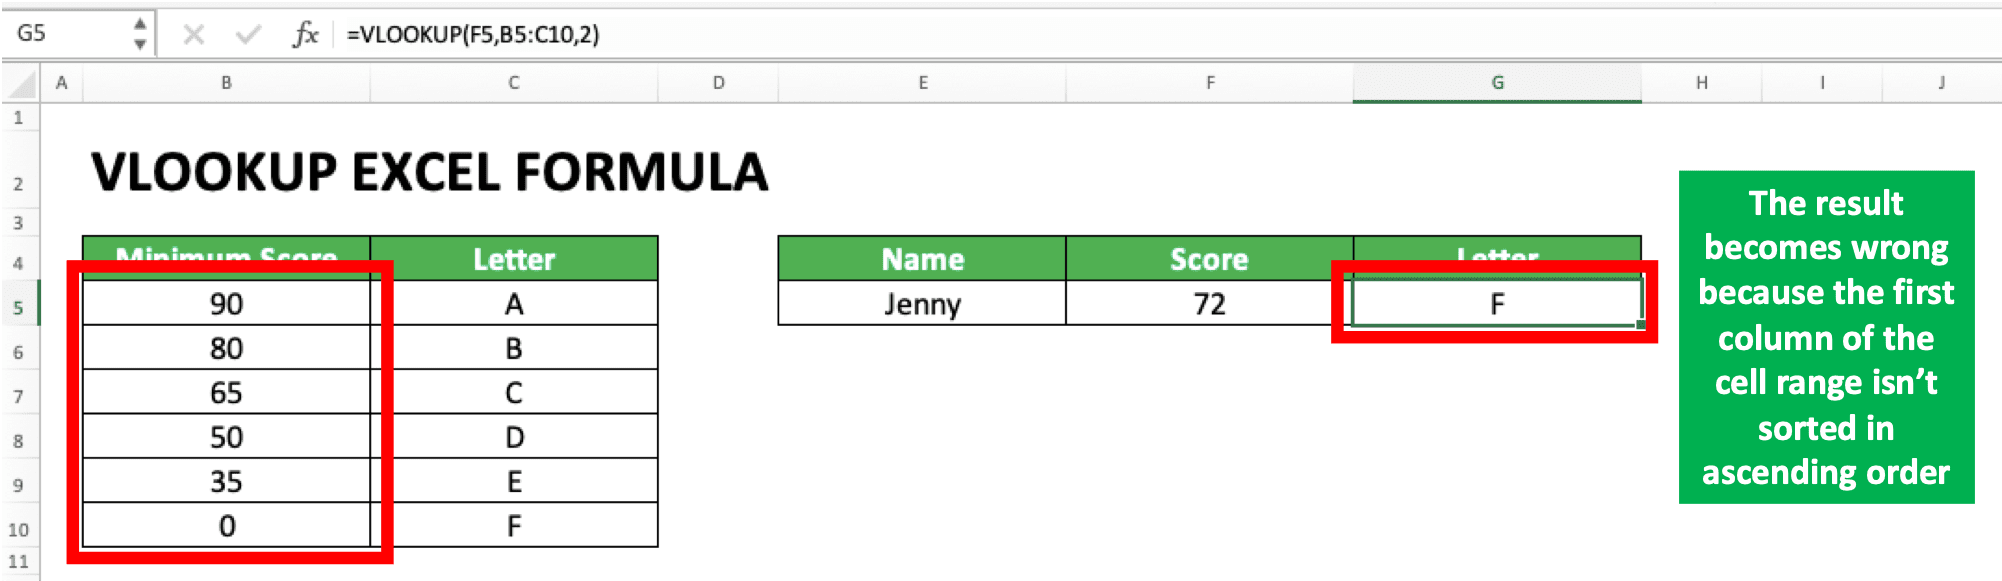 How to Use VLOOKUP Excel Formula - Screenshot of TRUE #N/A Error Because Data isn't Sorted in Ascending Order